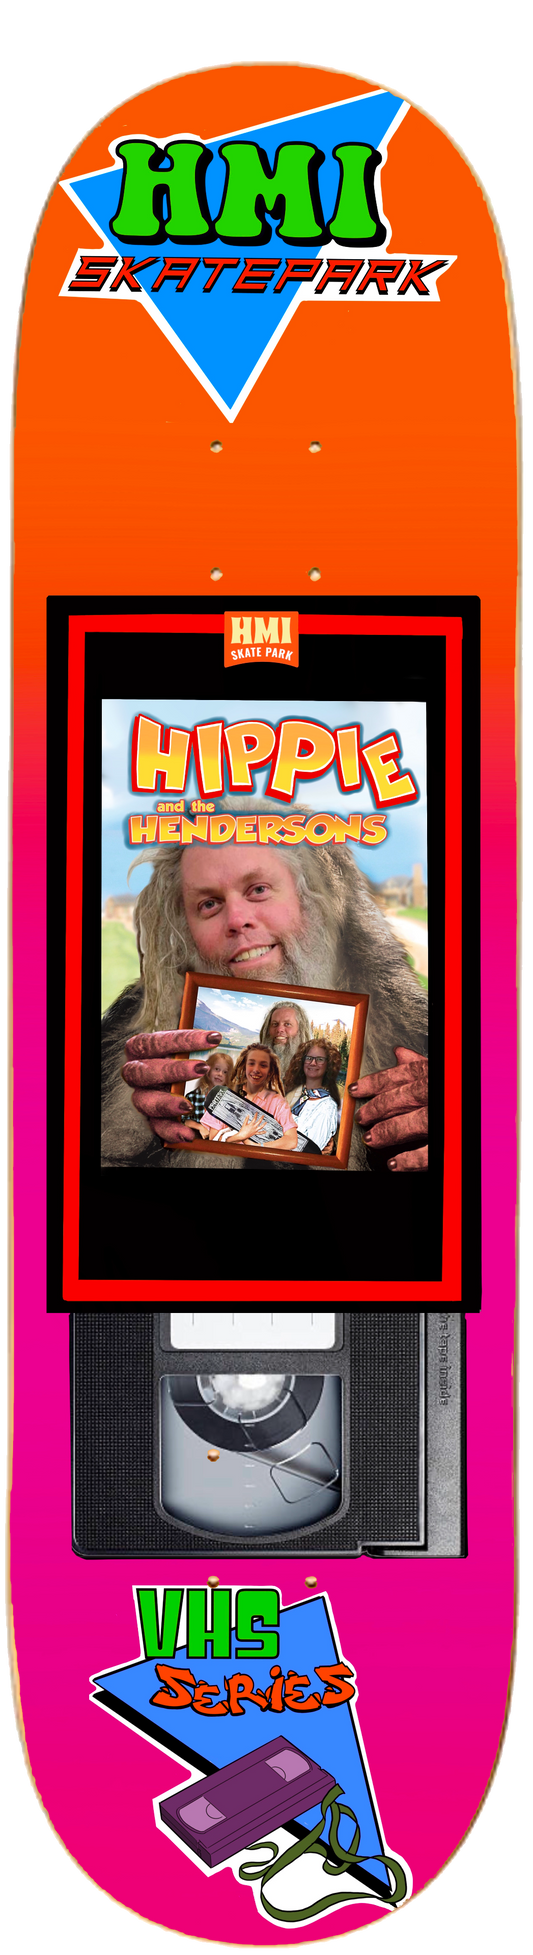 HMI Skateboards - Hippie and the Hendersons